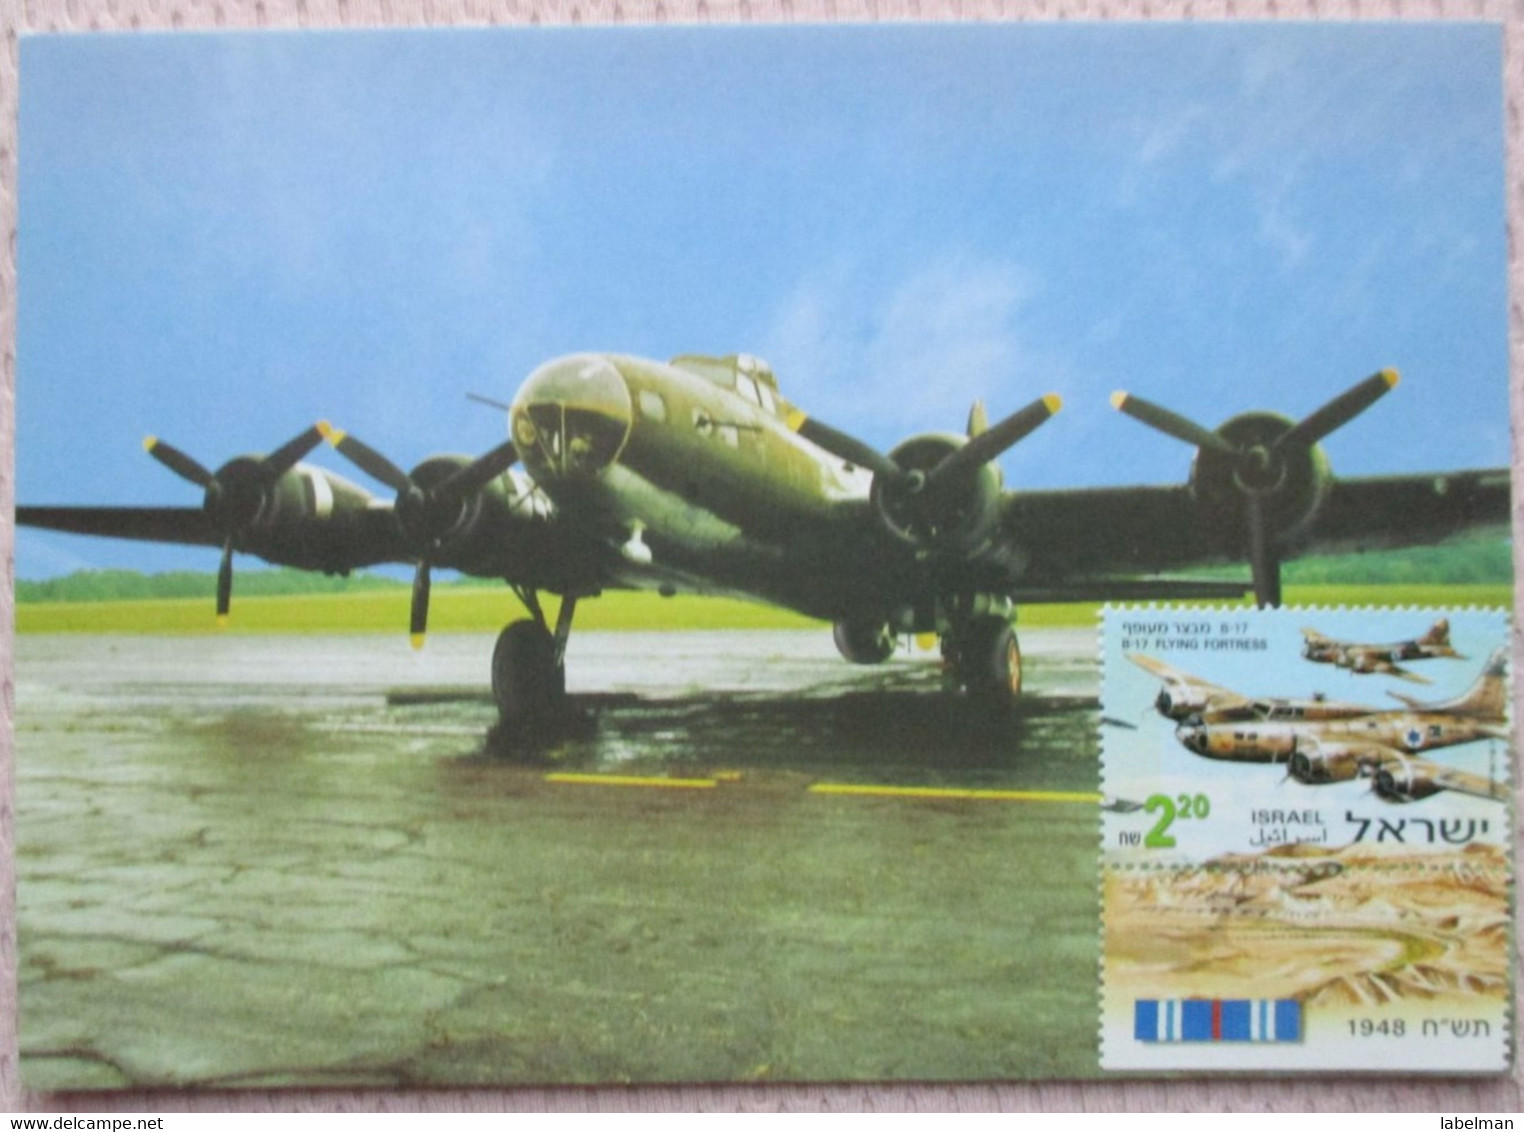 ISRAEL BOEING FLYING FORTRESS BOMBER AIRCRAFT AIR FORCE POSTCARD POSTKARTE ANSICHTSKARTE CARTOLINA CARTE POSTALE CP PC - Maximum Cards